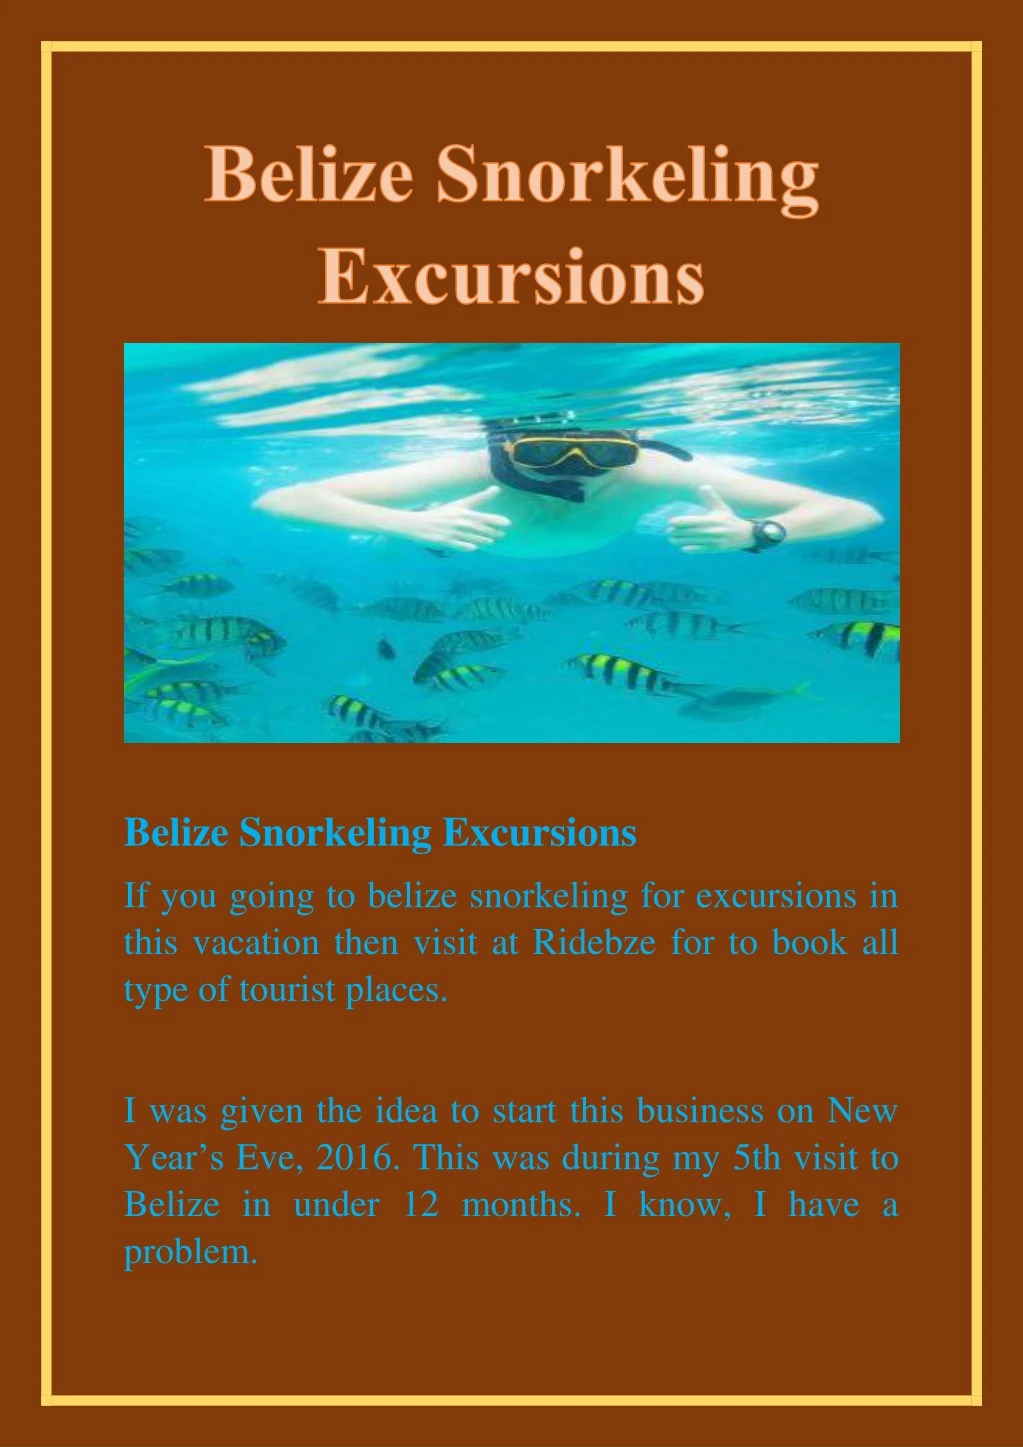 belize snorkeling excursions if you going